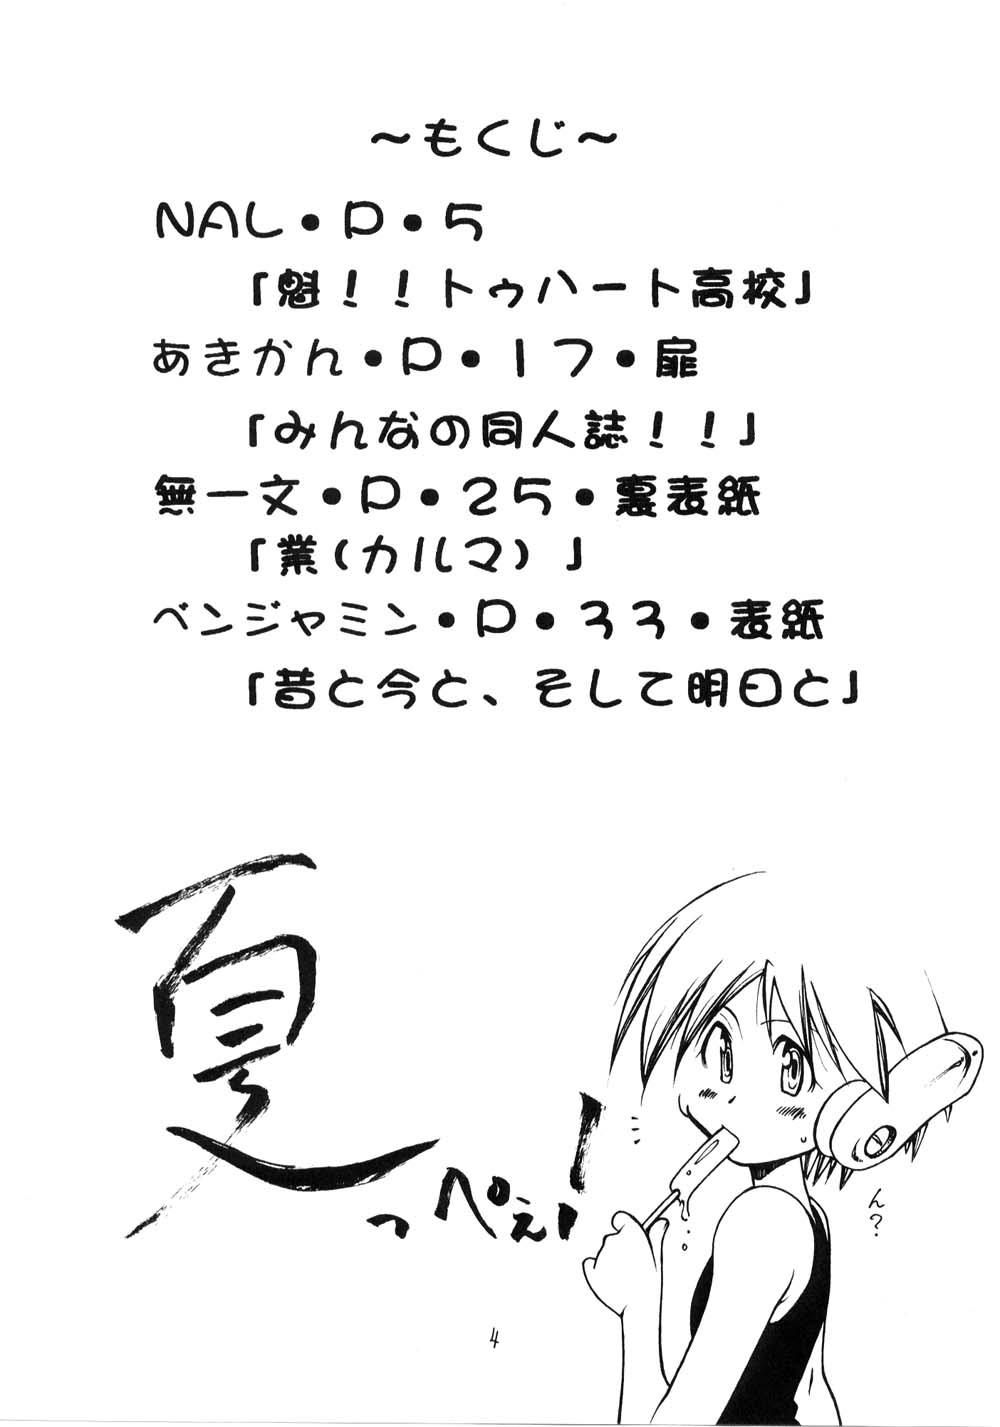 Jap Credit Note Vol. 5 - To heart Comic party Kizuato Teenfuns - Page 3